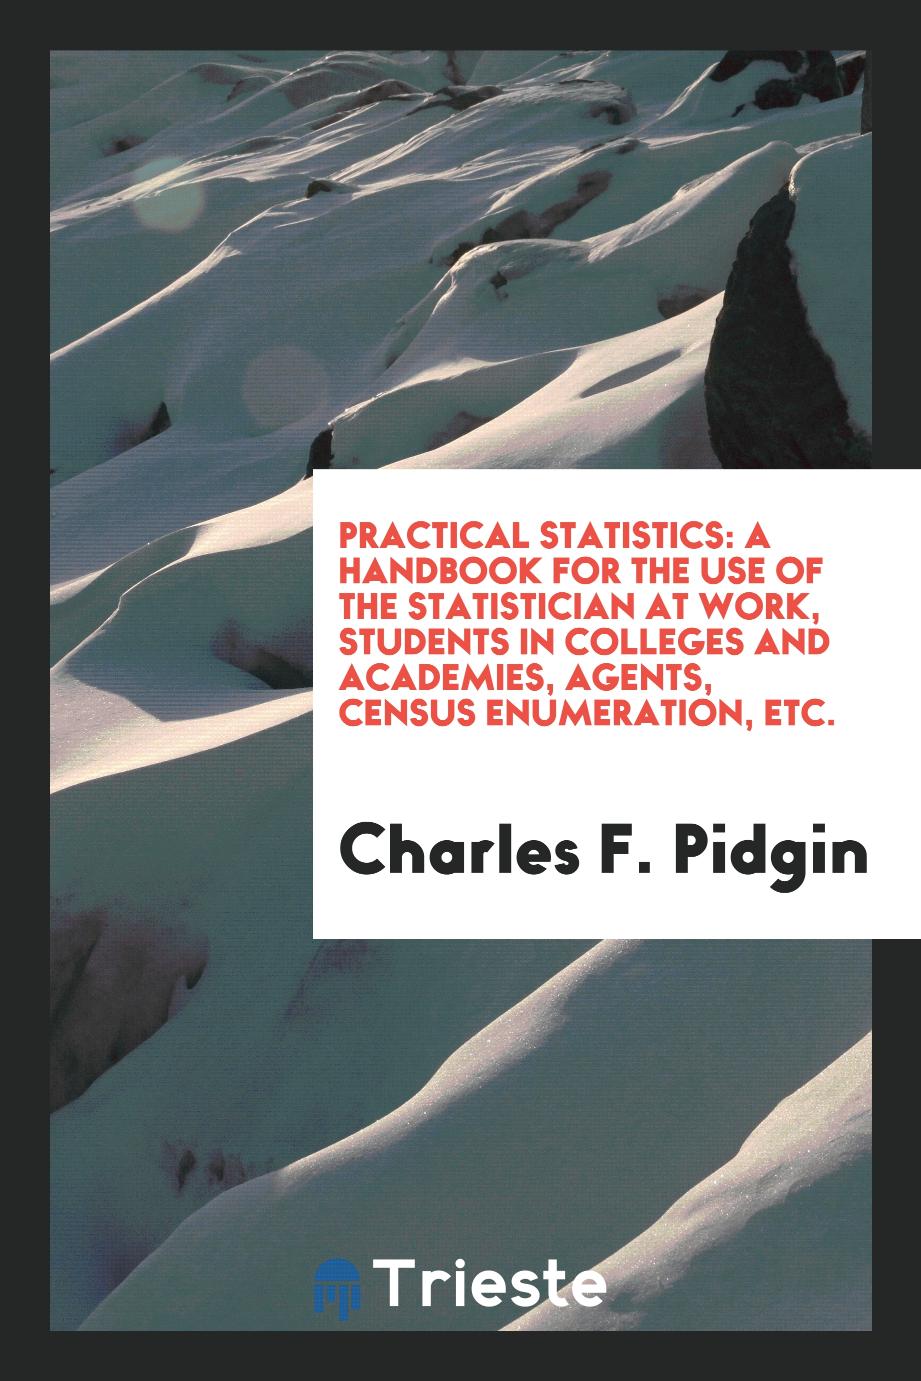 Practical Statistics: A Handbook for the Use of the Statistician at Work, Students in Colleges and Academies, Agents, Census Enumeration, etc.